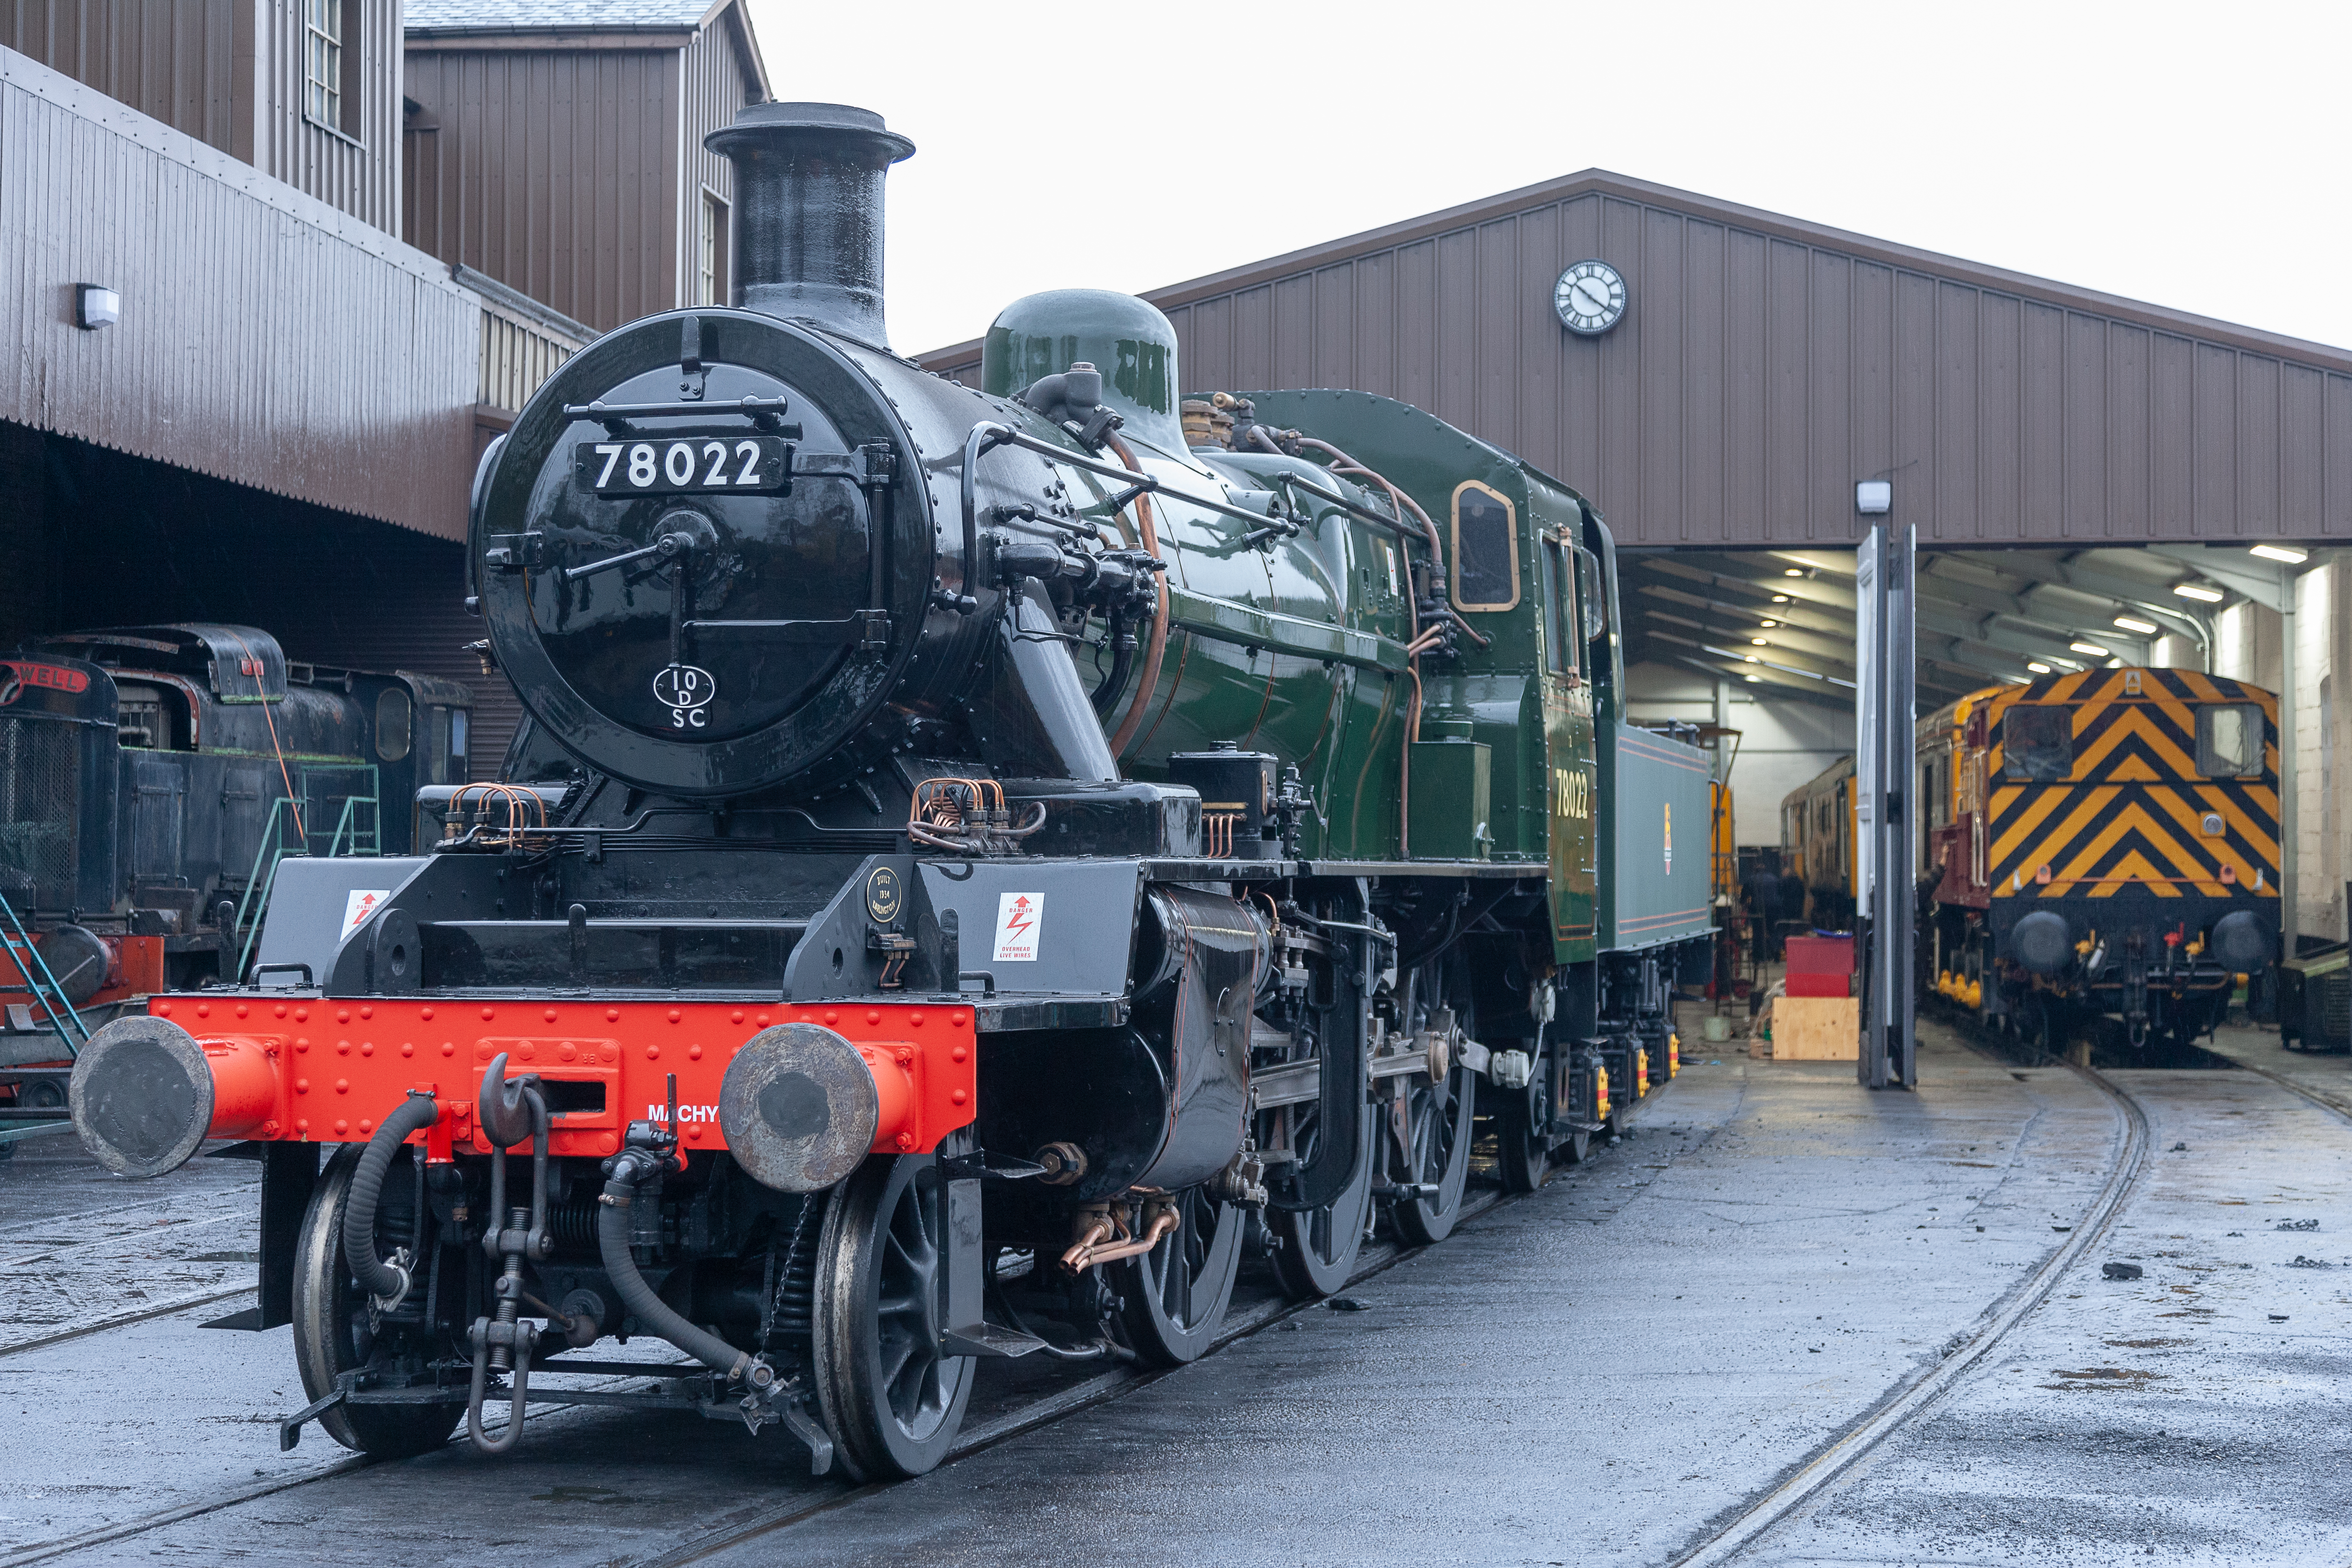 No. 78022, a preserved 2MT Standard Class locomotive in BR Green livery. This locomotive is in service on the Keighley & Worth Valley Railway. The above image is from a Hornby survey research trip in 2018. 